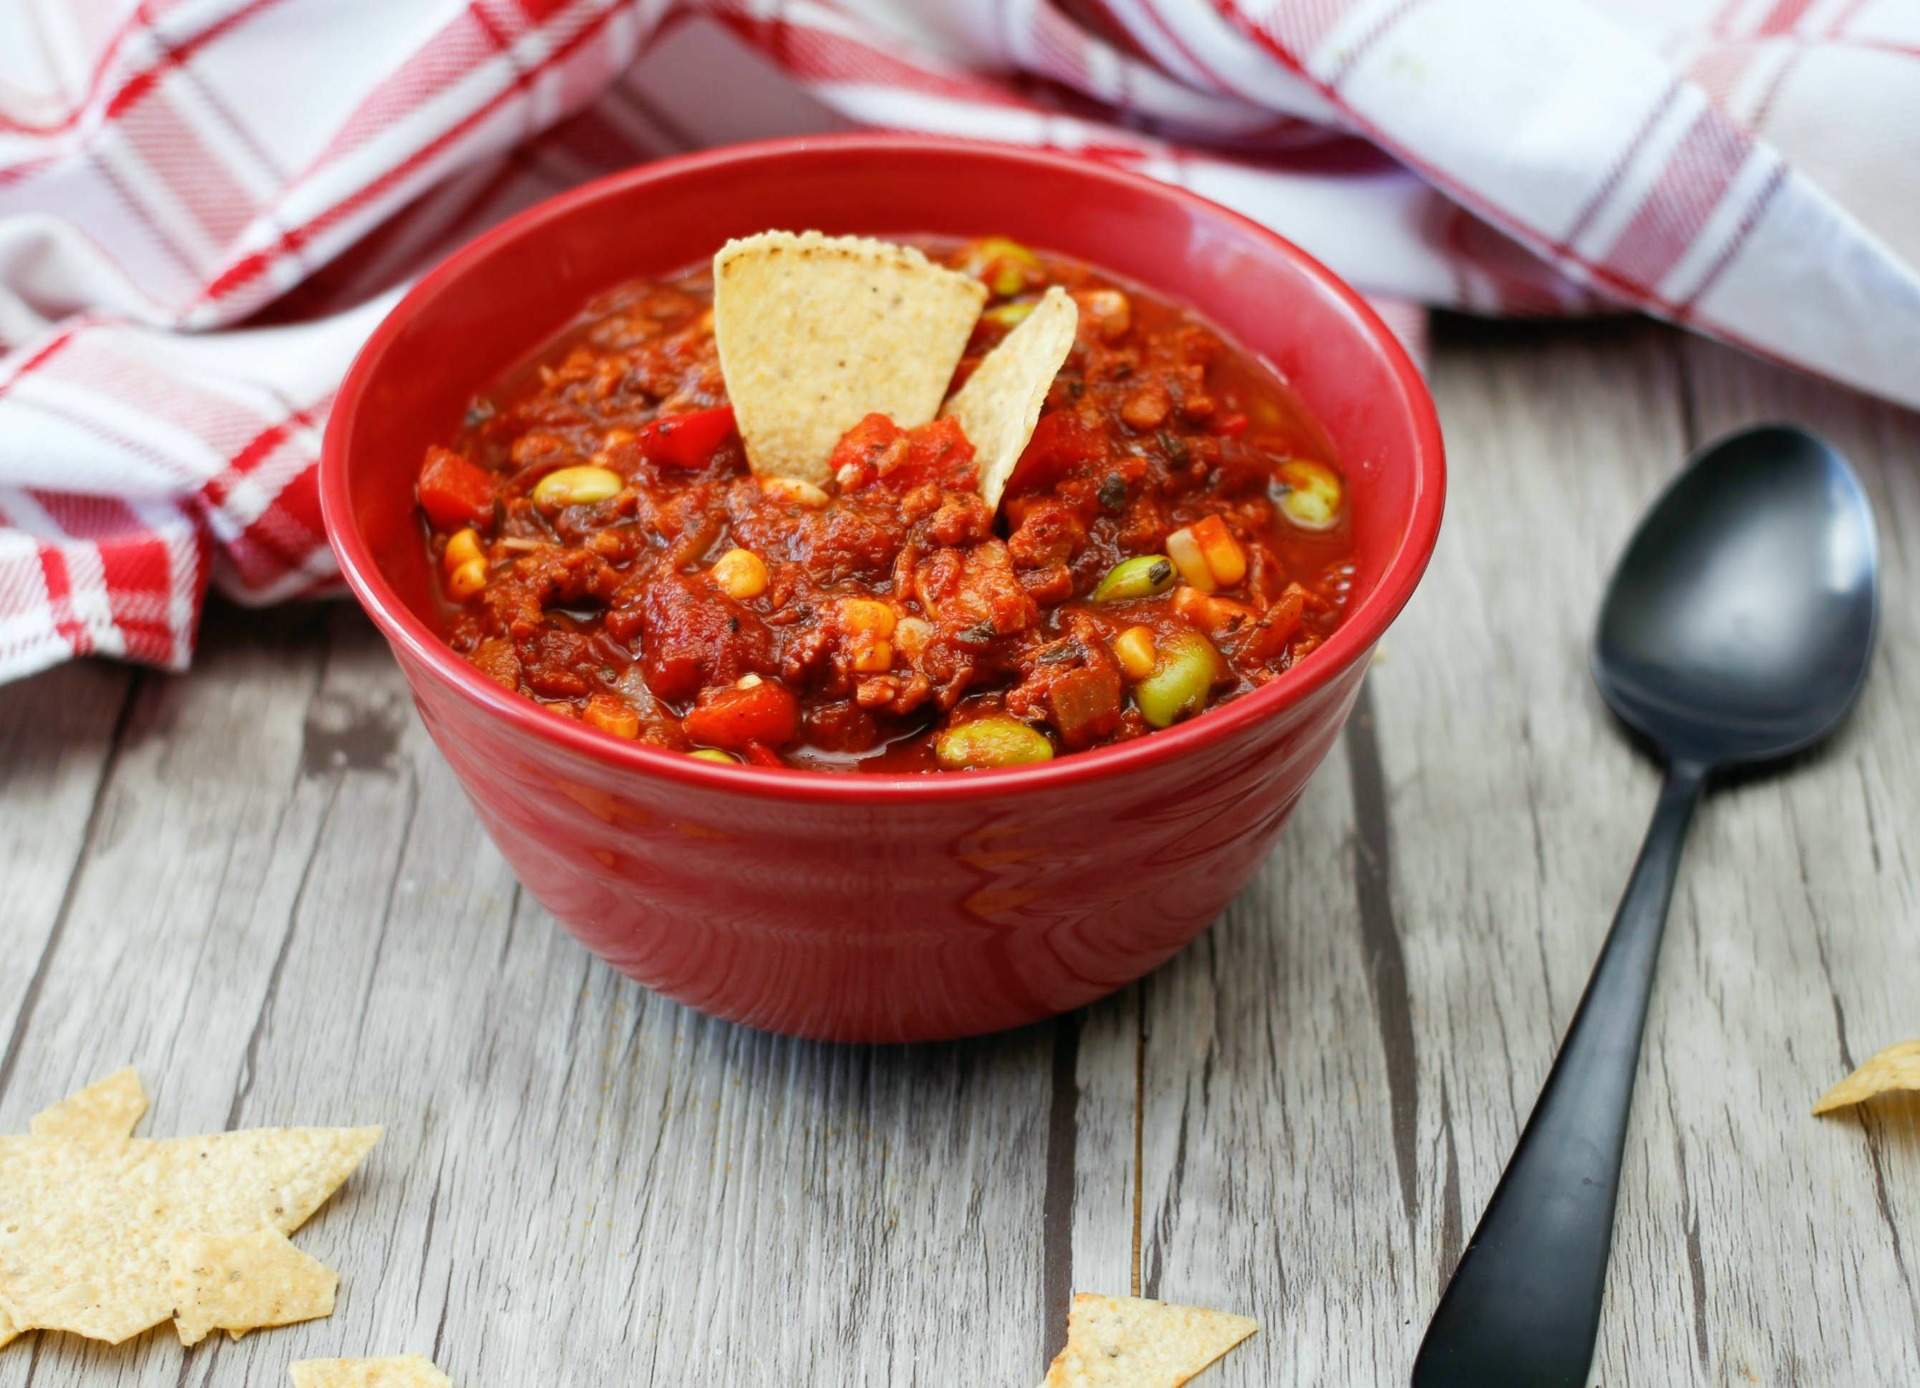 diy_recipe_simple_and_healthy_cannabis_infused_chili_397b3e8b28